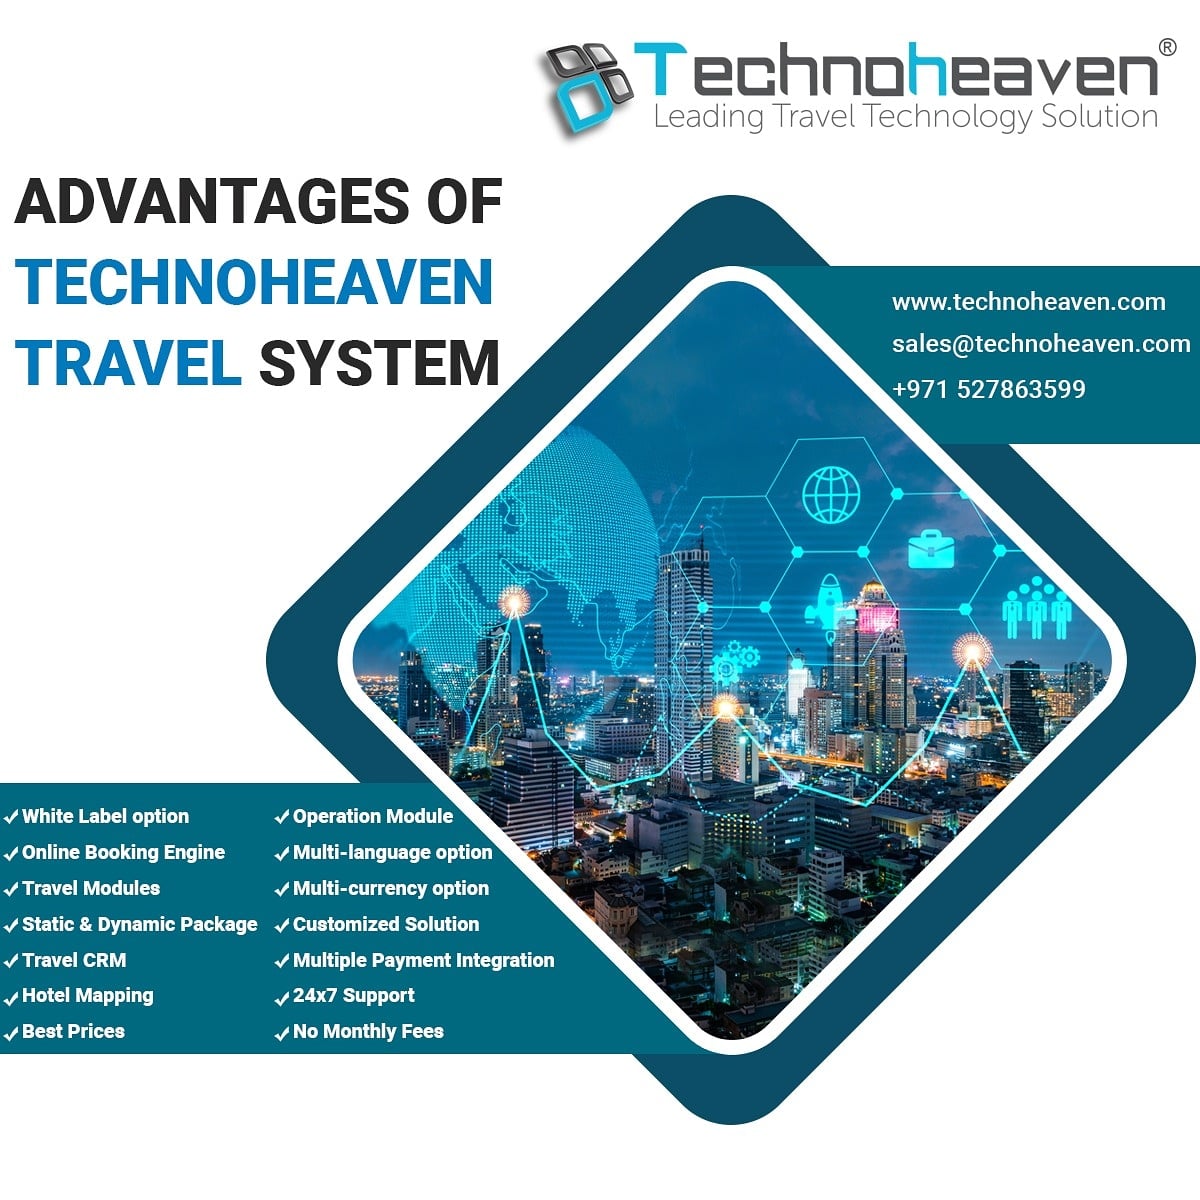 Top Trending Travel Technology Solutions in Travel Industry